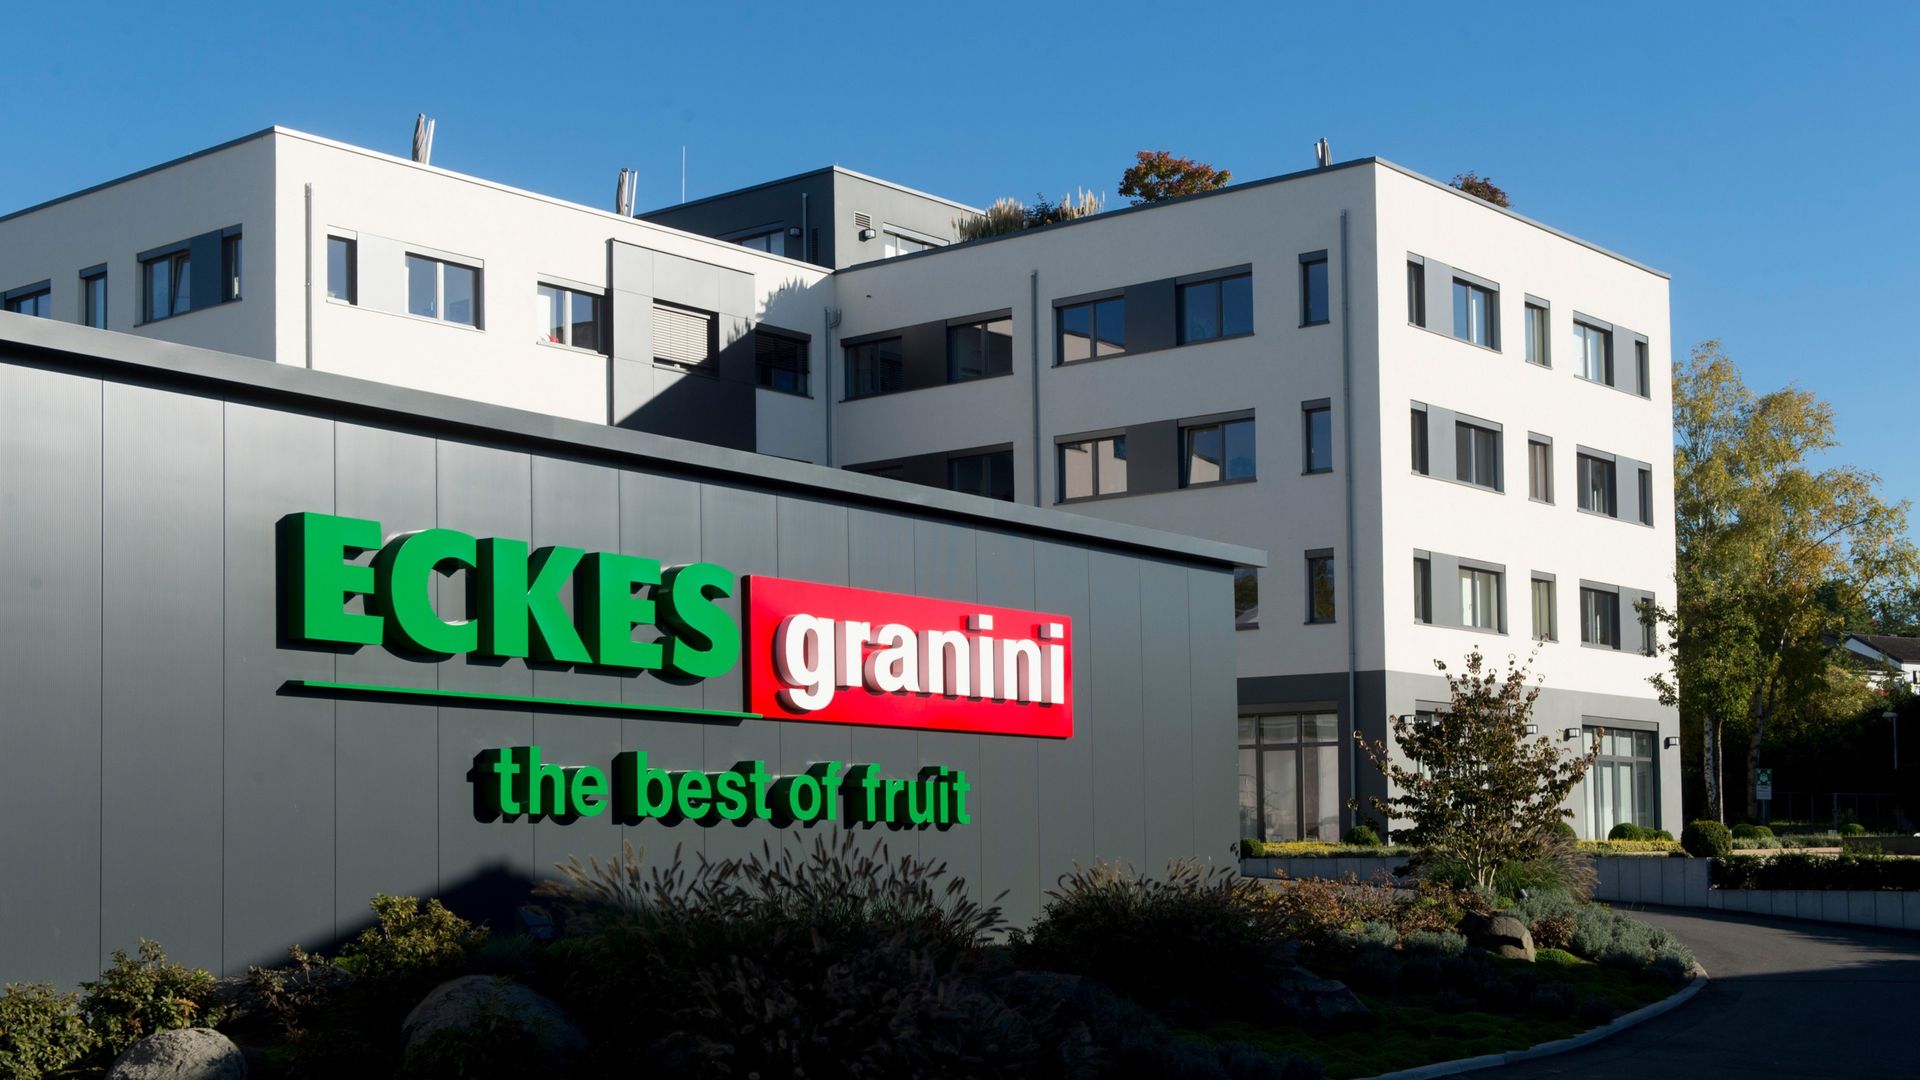 Image of the ECKES Granini headquarters in Germany